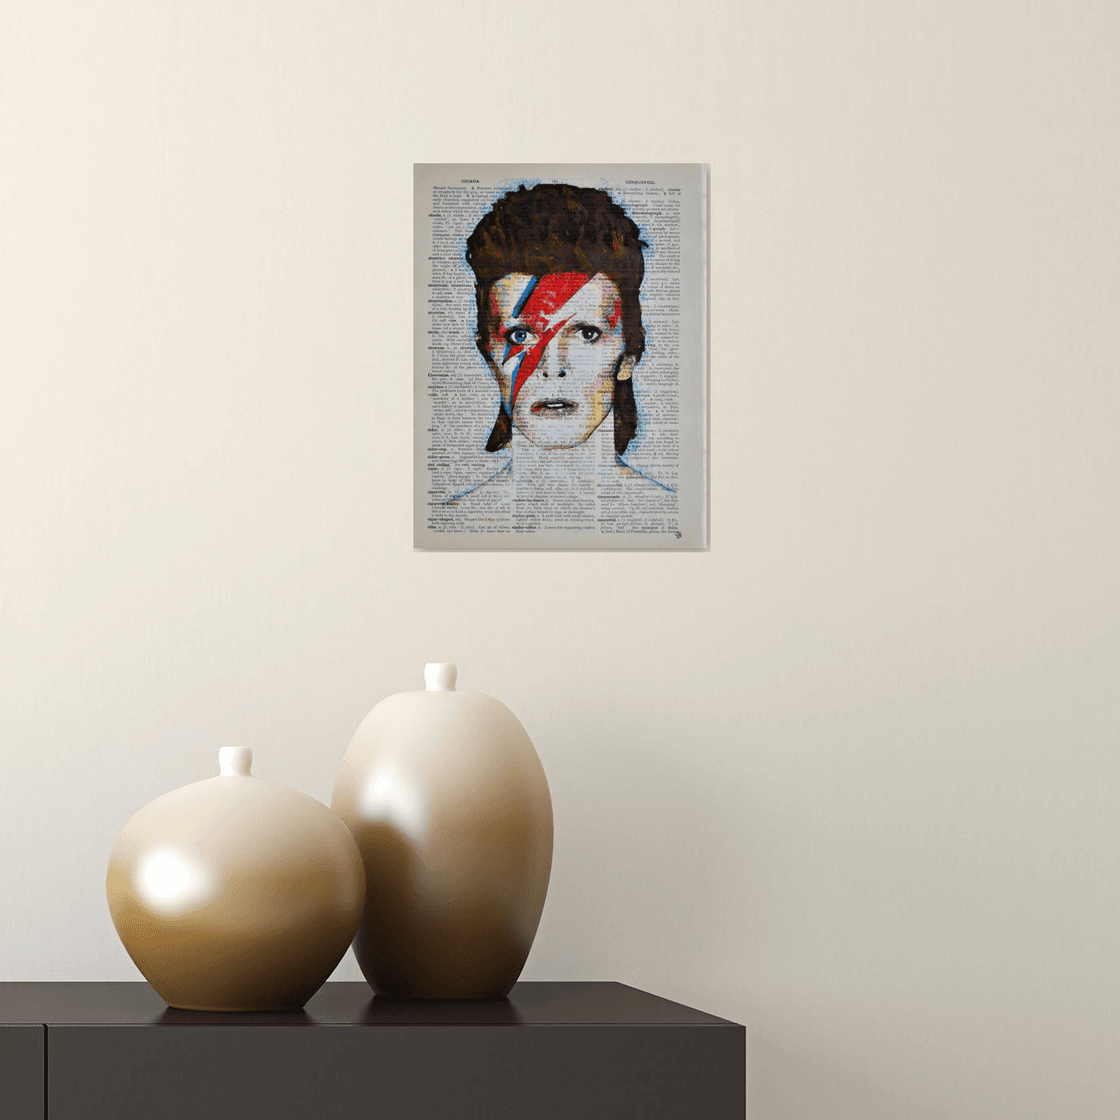 David Bowie - Ziggy Stardust - Collage Art on Large Real English